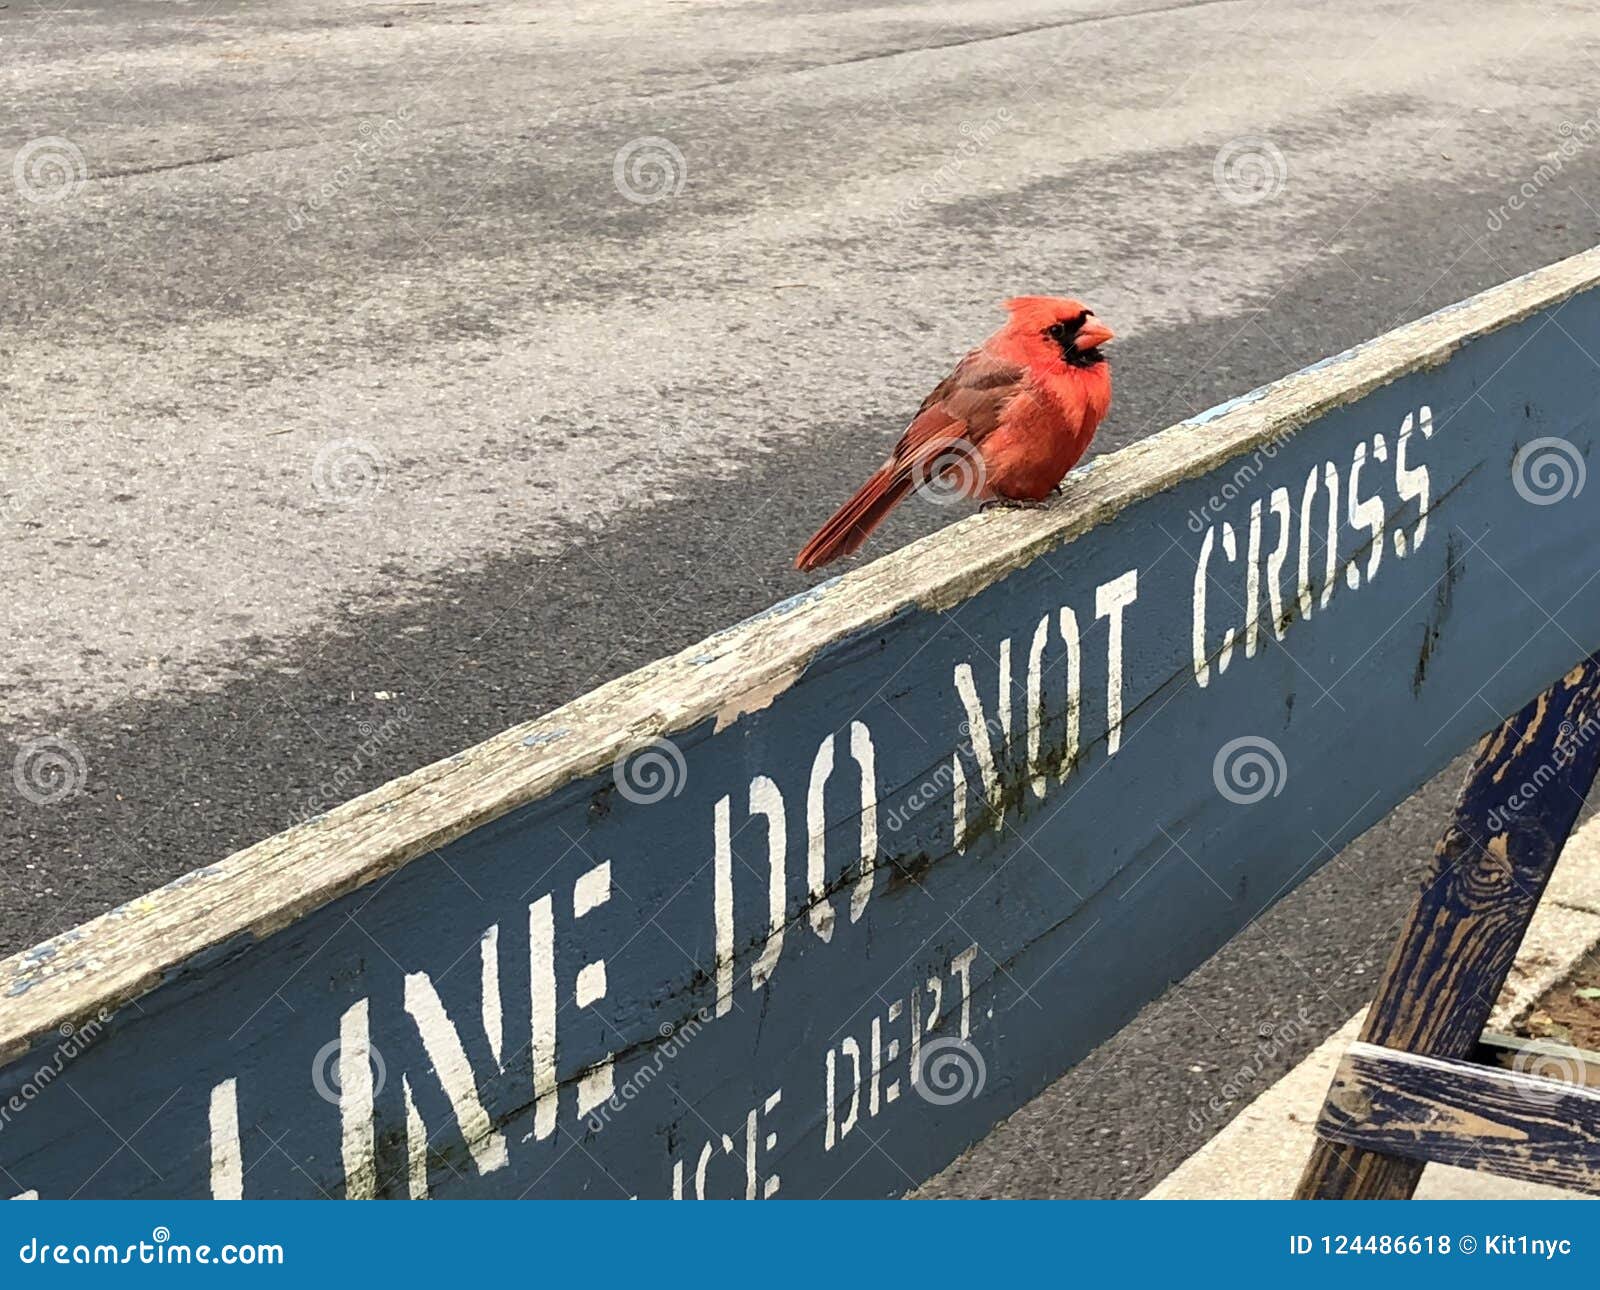 small red robin bird perched on police sign do not cross barricade fence